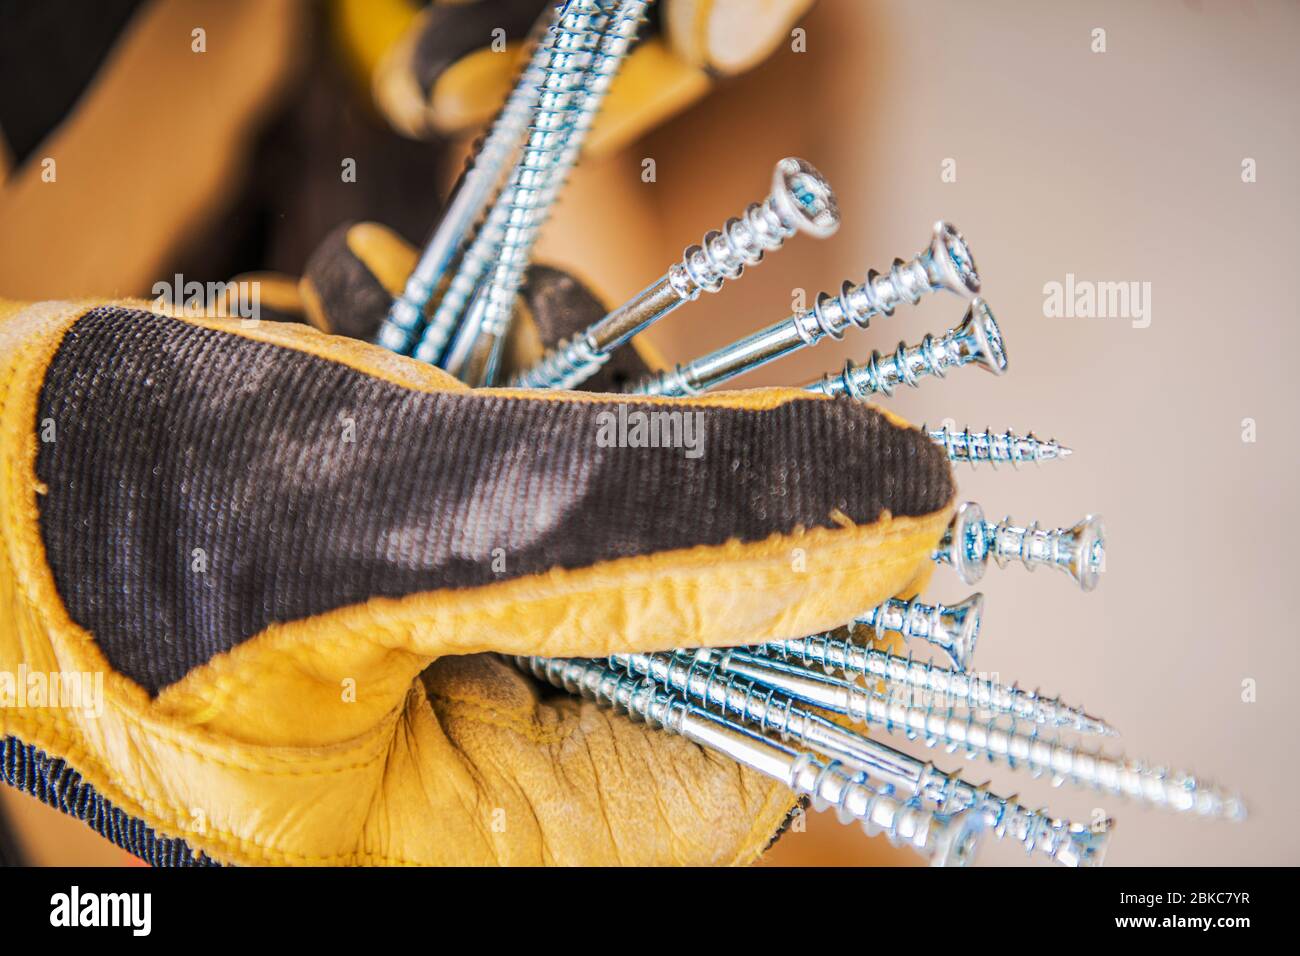 Construction Metal Screws in Worker's Hand. Industrial Theme. Safety Gloves. Stock Photo